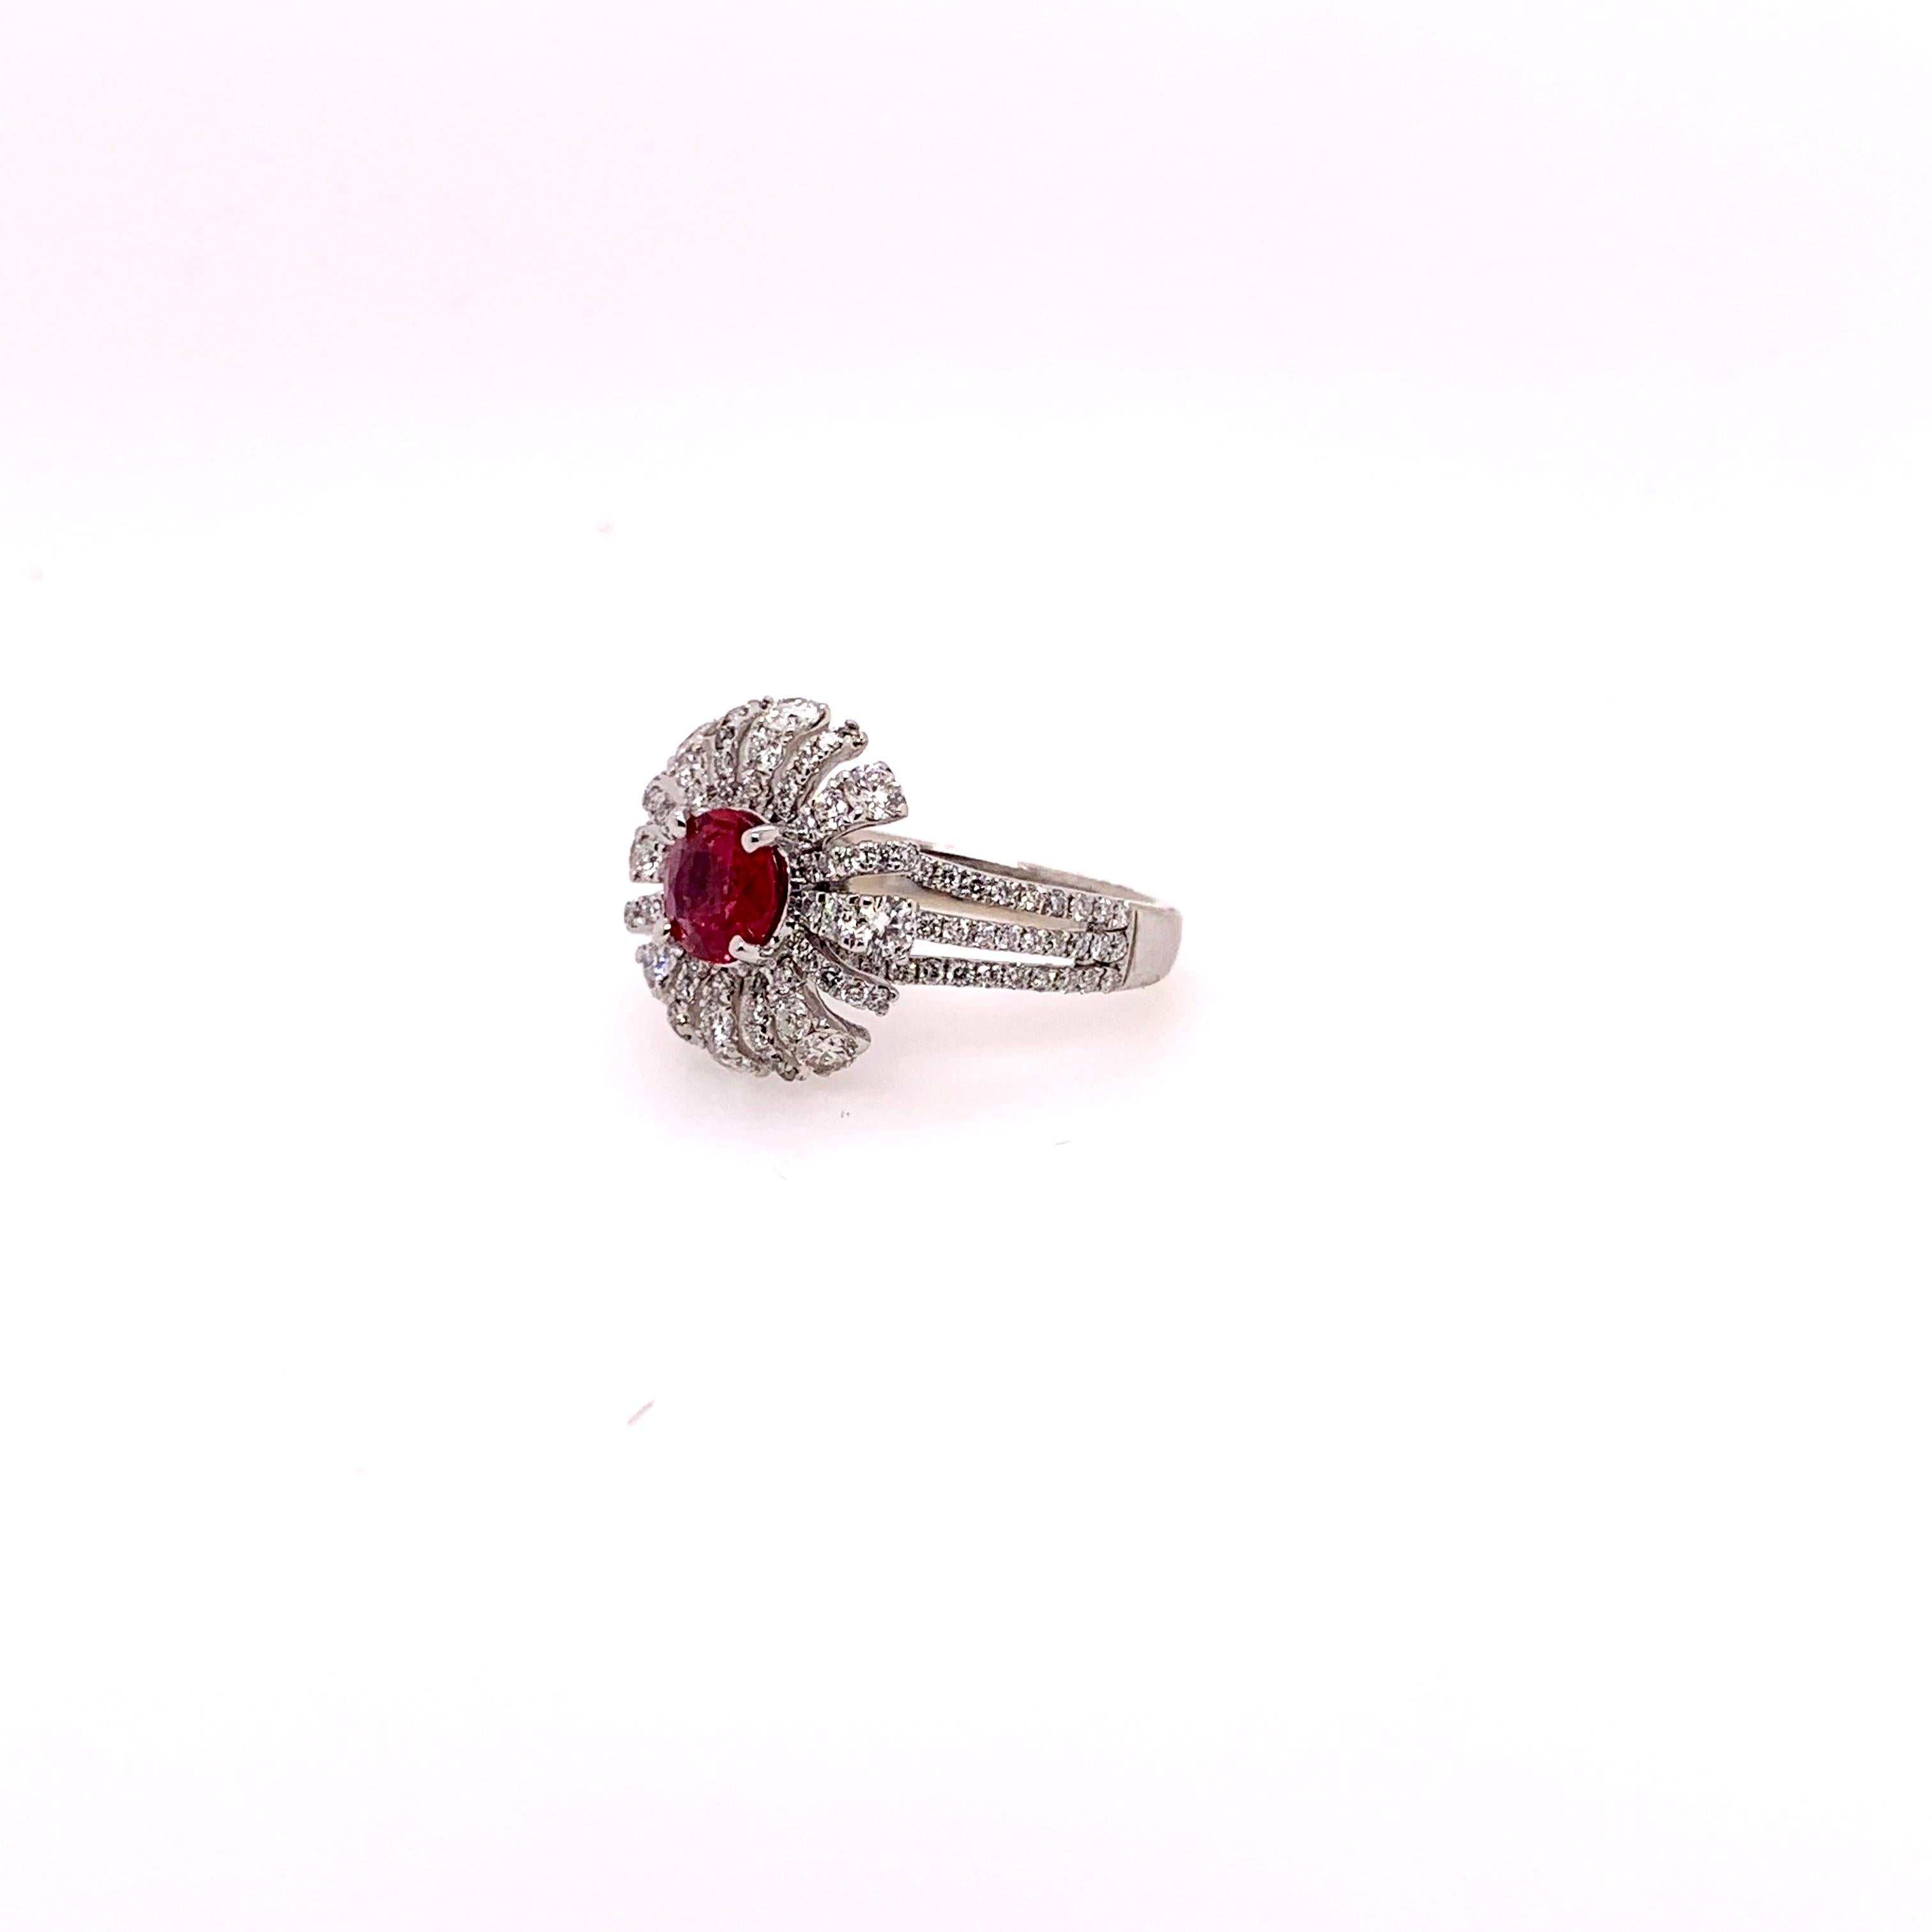 Stunning GIA certified ruby with a strong, red vivid color hue that is set within a custom made setting.  The 18k white gold setting is accented with 1.23 carats of round brilliant diamonds while the ruby weighs 0.95 carat.   The crisp, strong red